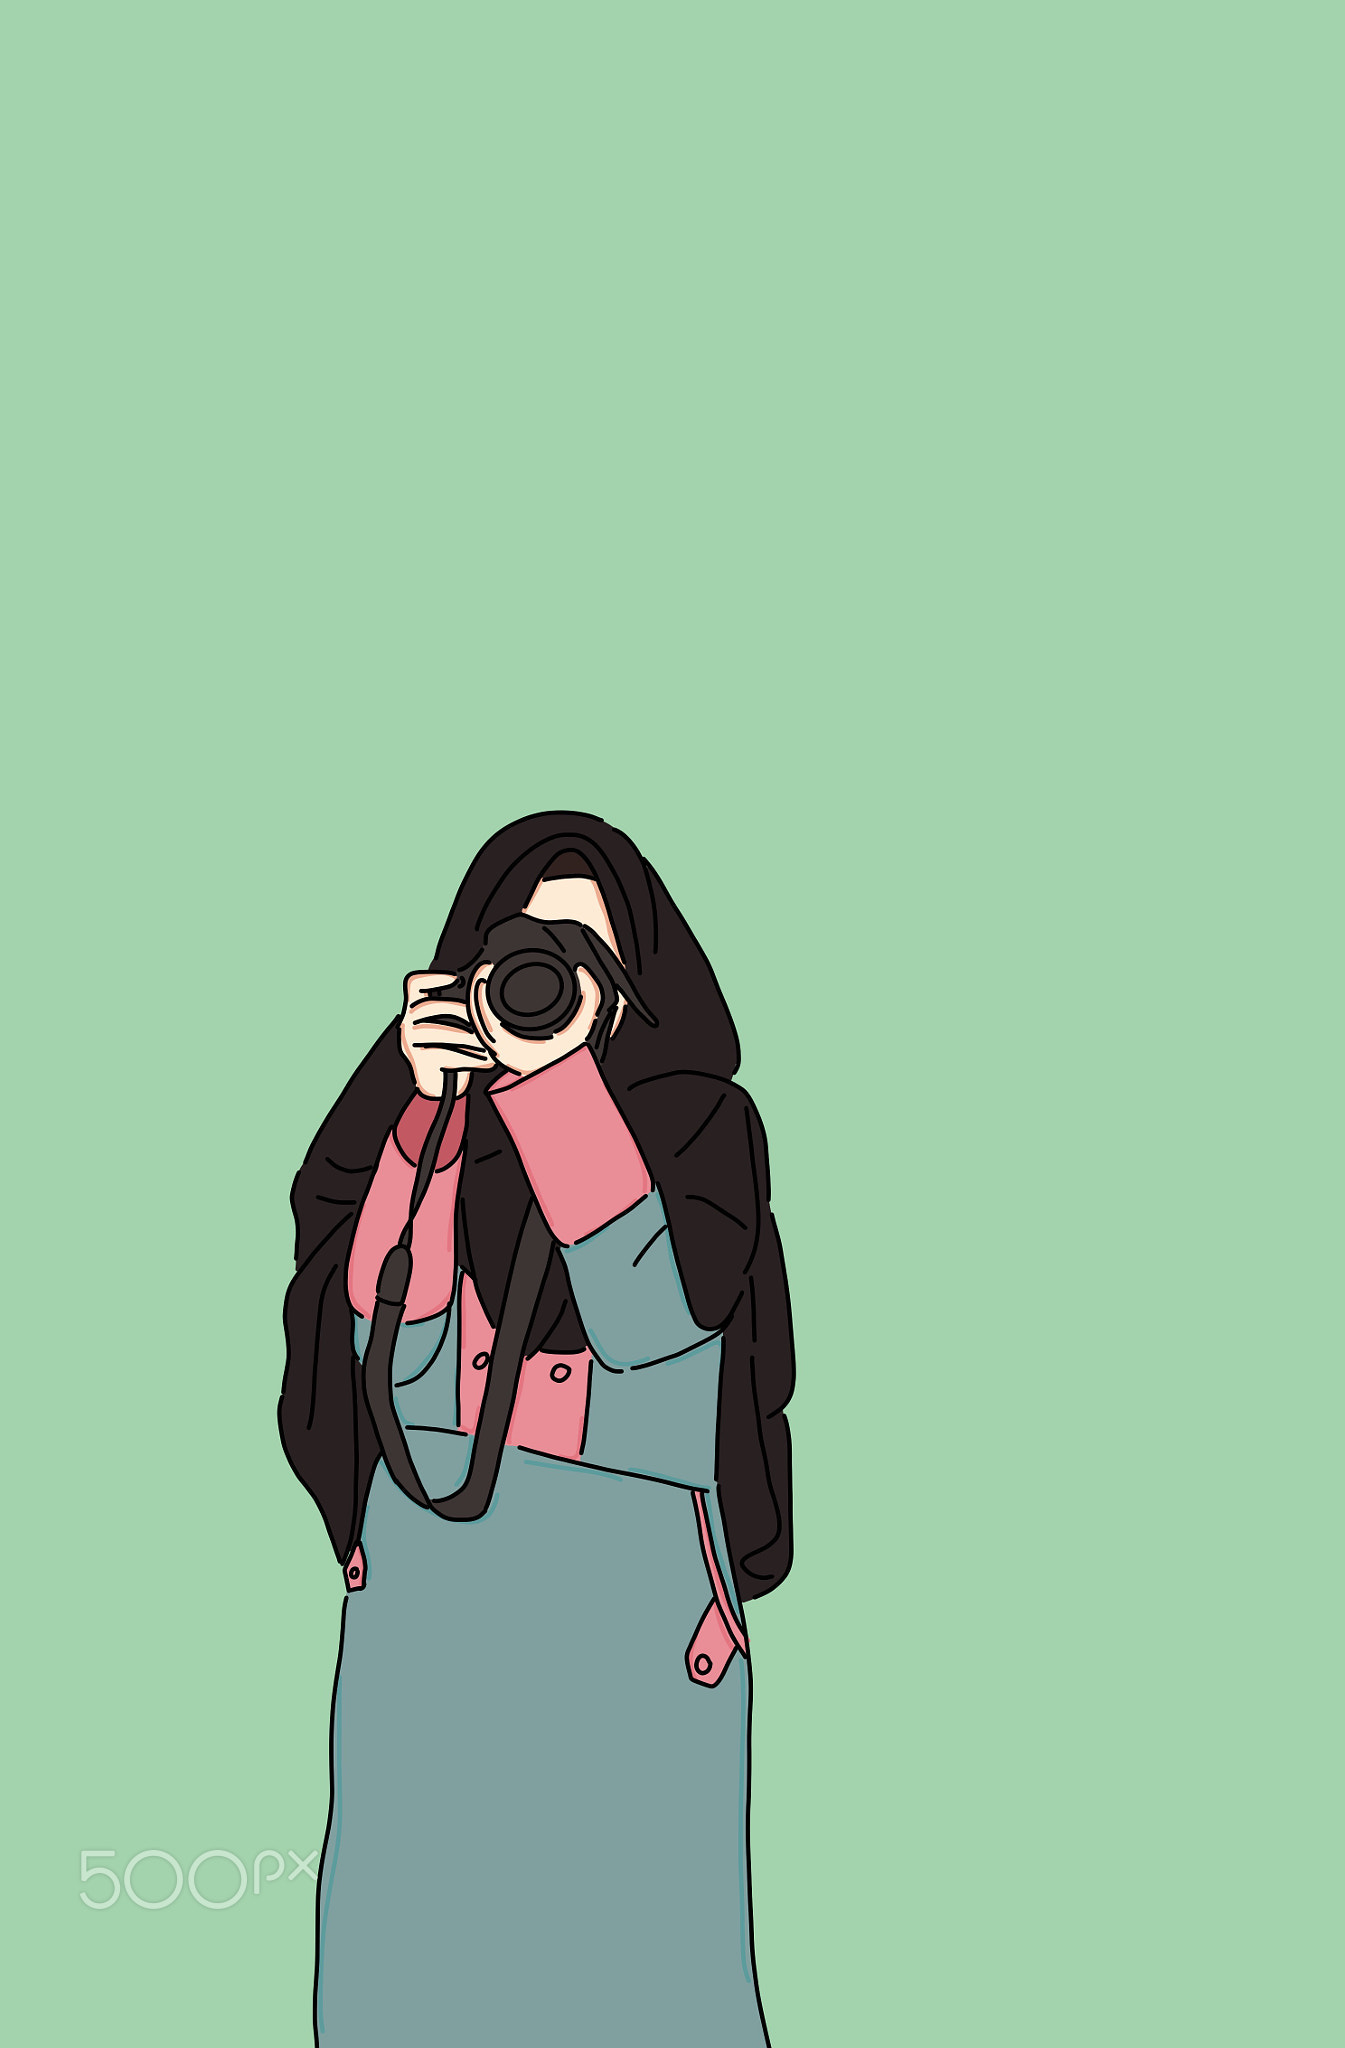 Animation of a woman wearing a hijab holding a camera